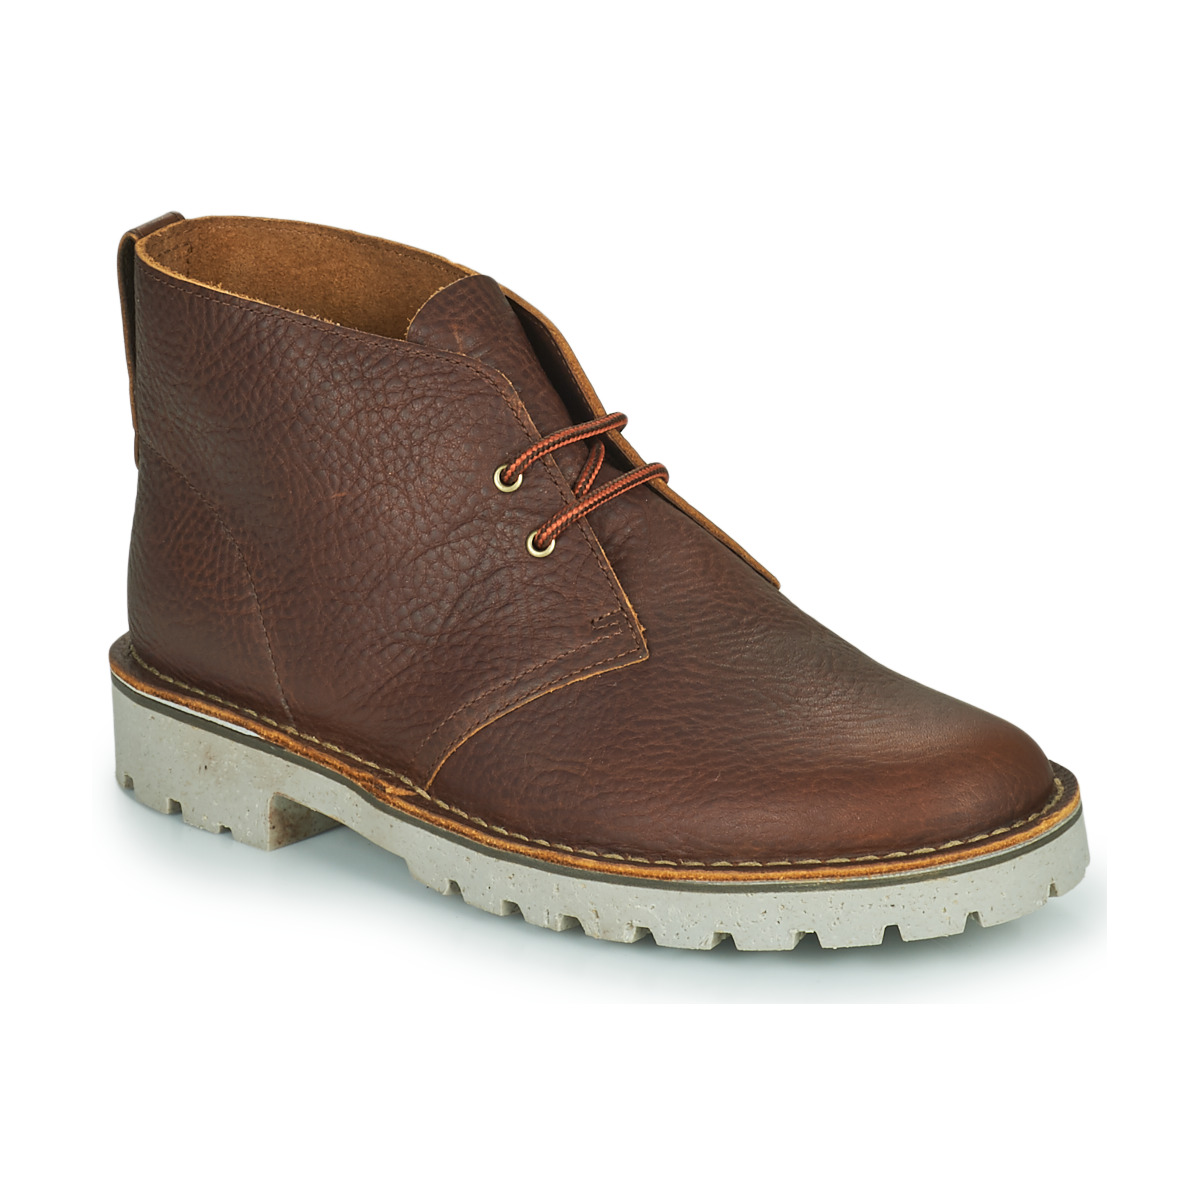 Chaussures Homme Boots Clarks OVERDALE MID 